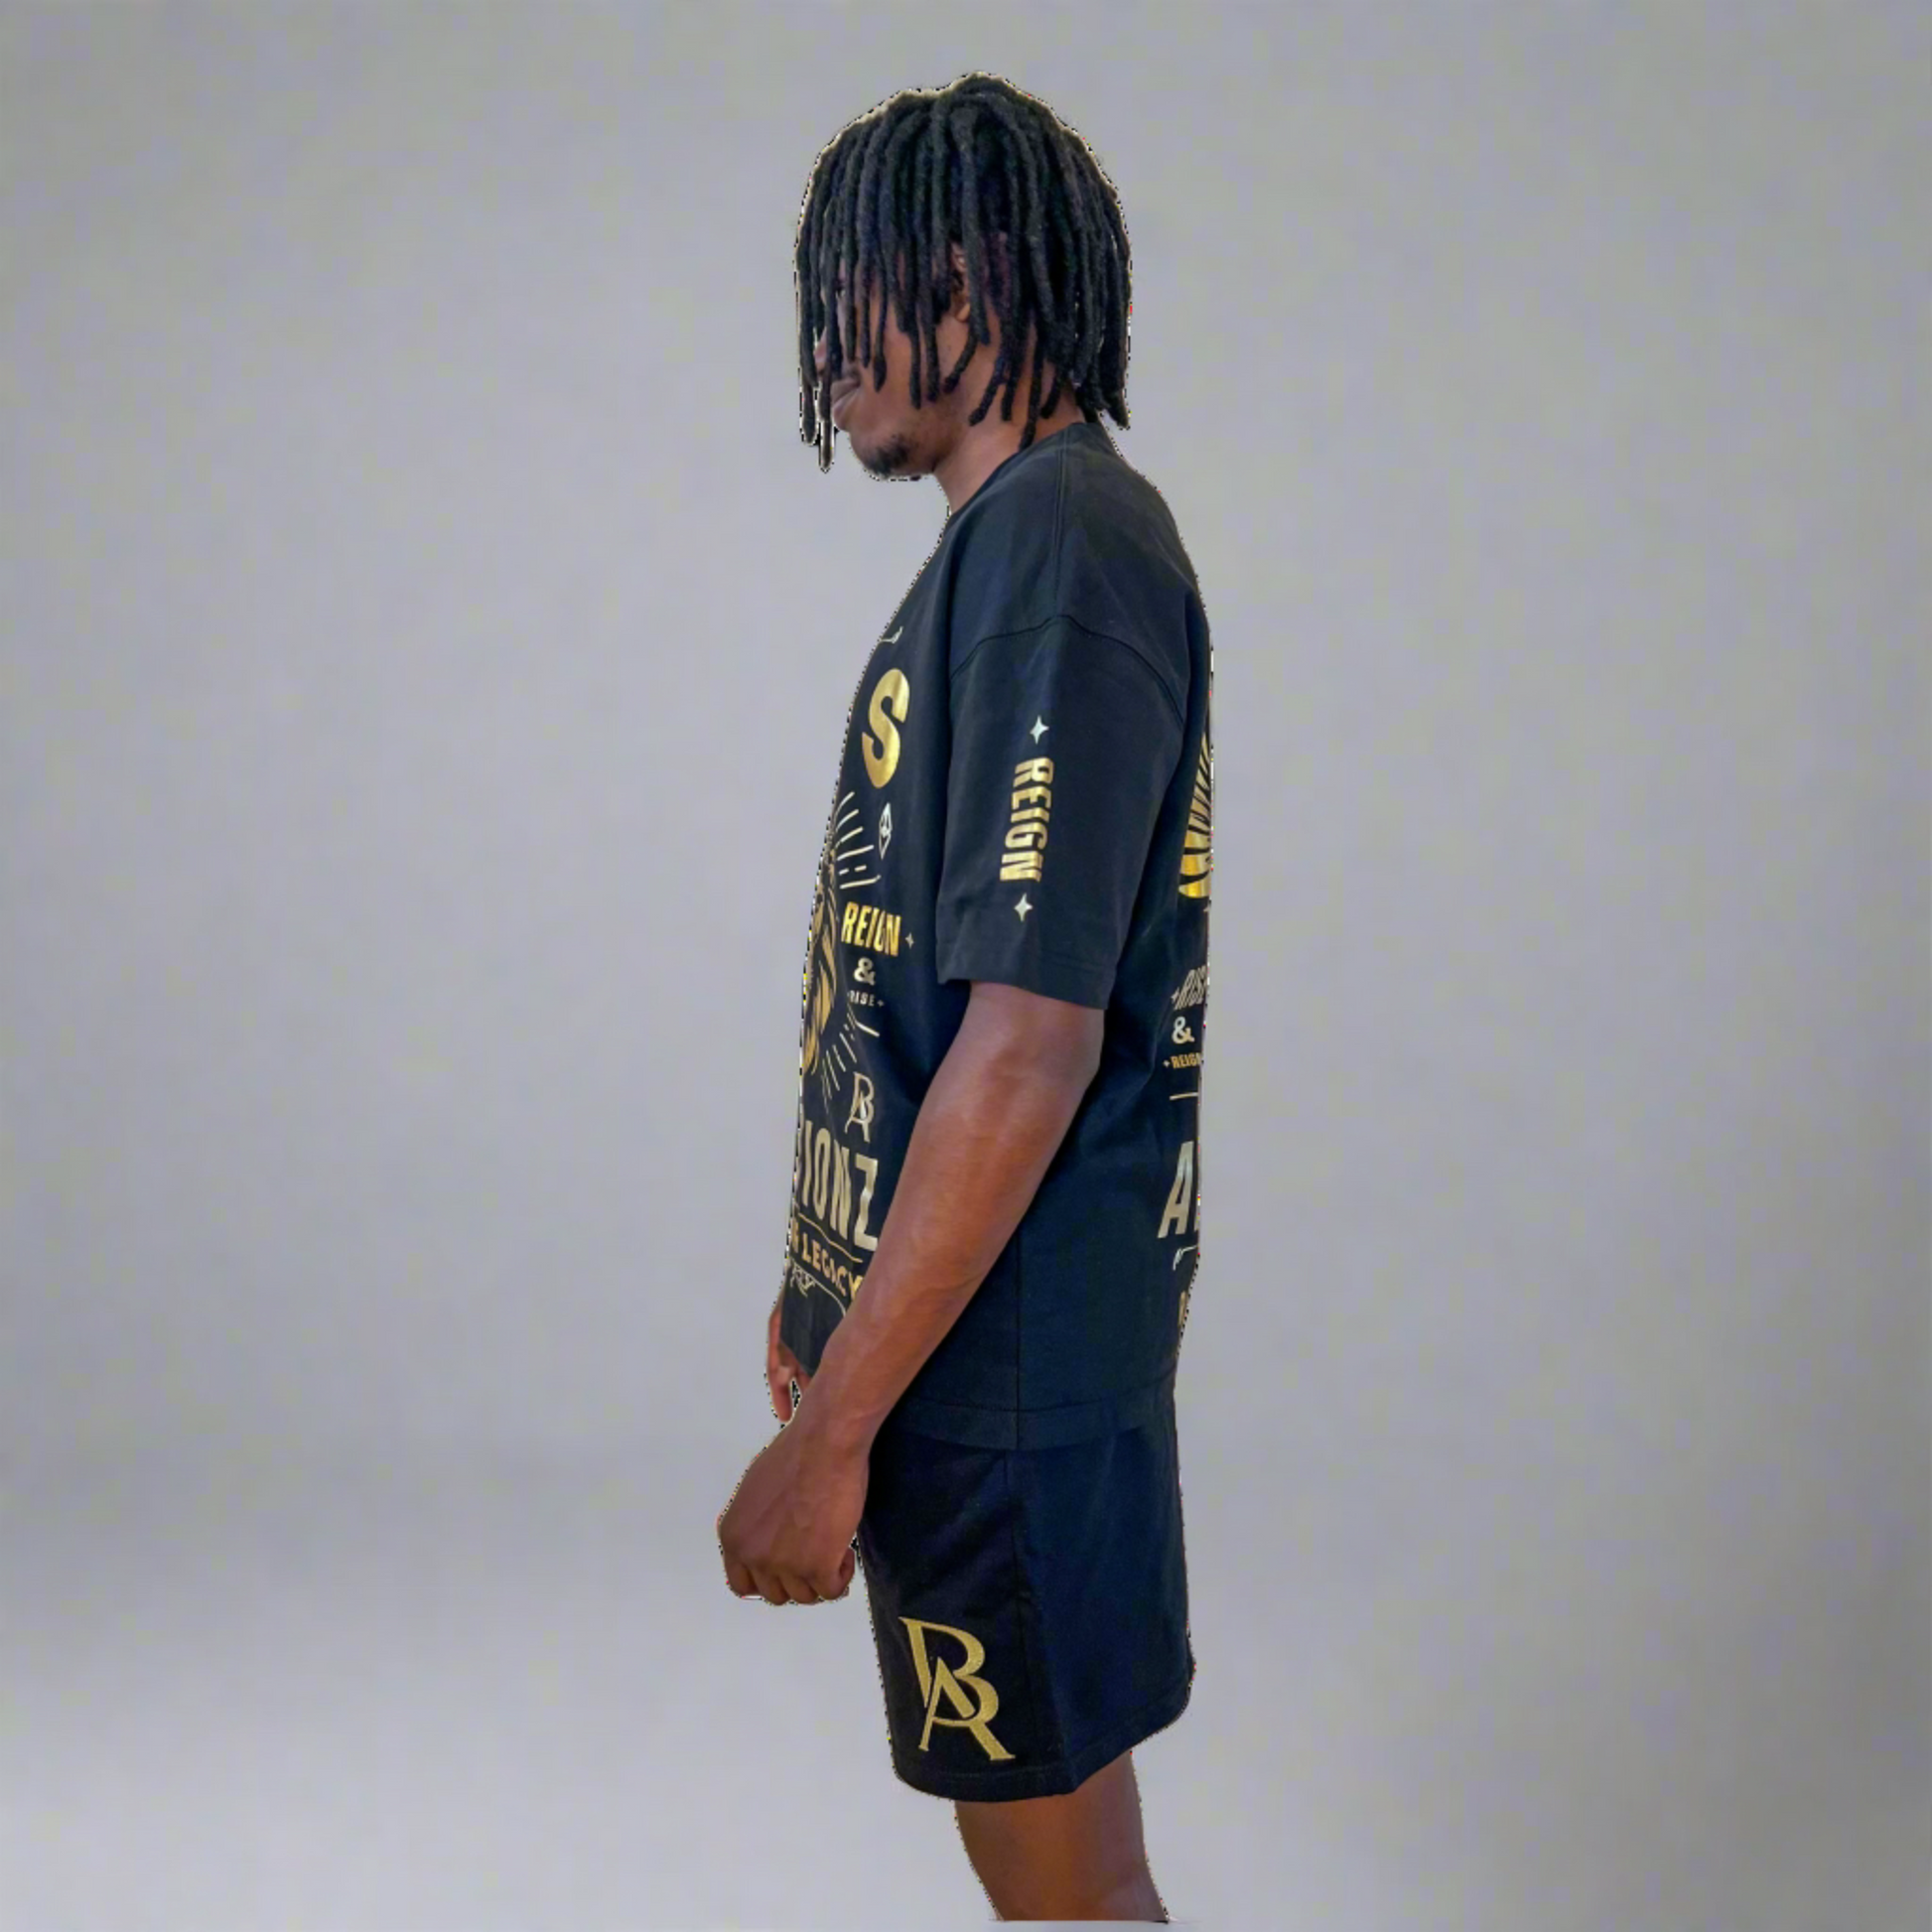 Side profile of DaKidswagg modeling Boss Ambitionz outfit: "Side profile of DaKidswagg modeling a black Boss Ambitionz t-shirt and shorts, showcasing the detailed gold text and logo designs